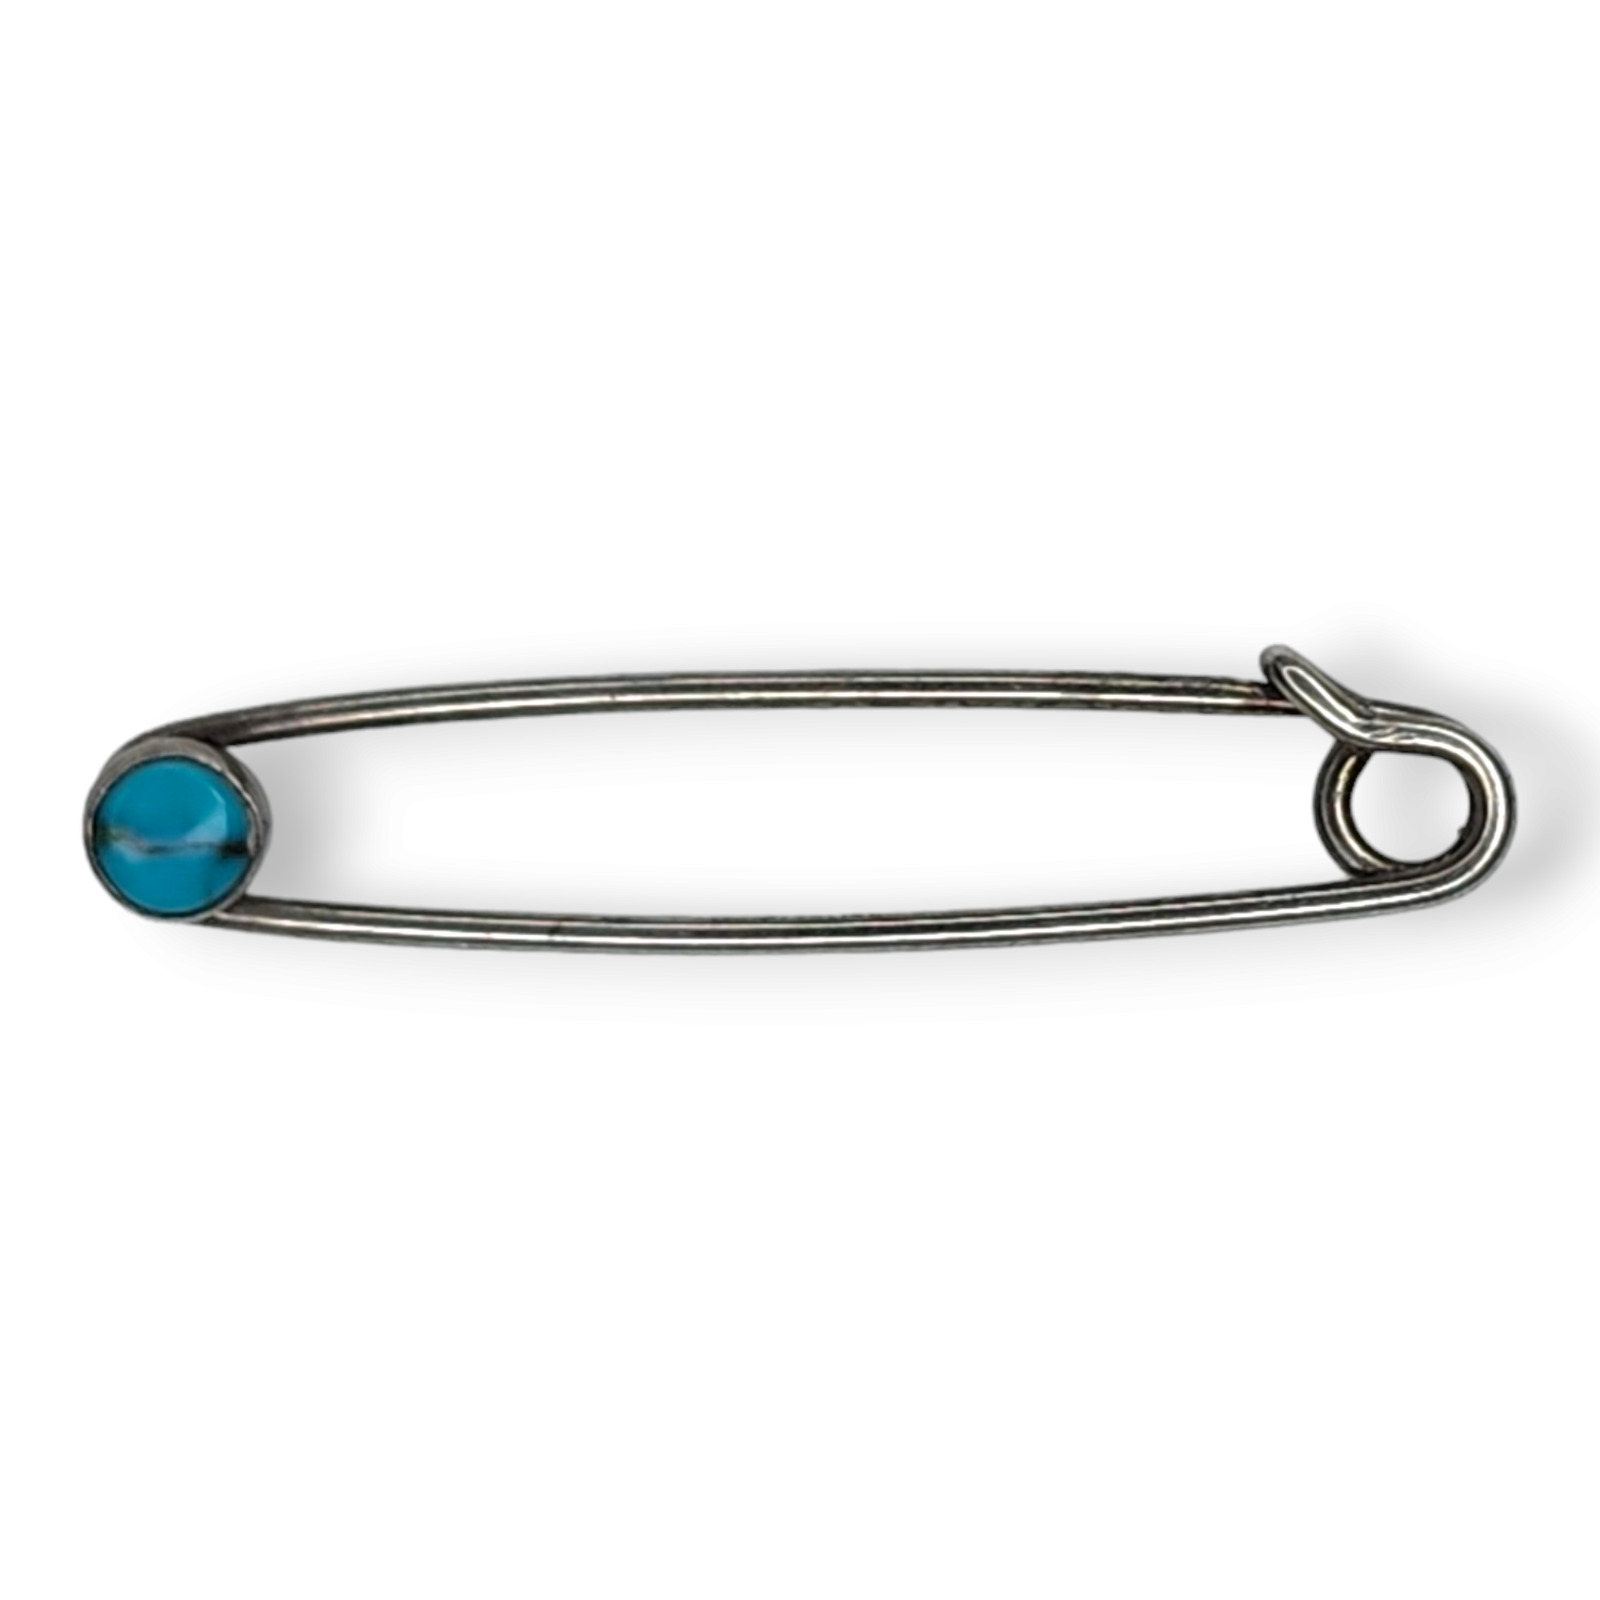 Vintage Southwestern Native American Navajo Sterling Silver Turquoise Safety Pin